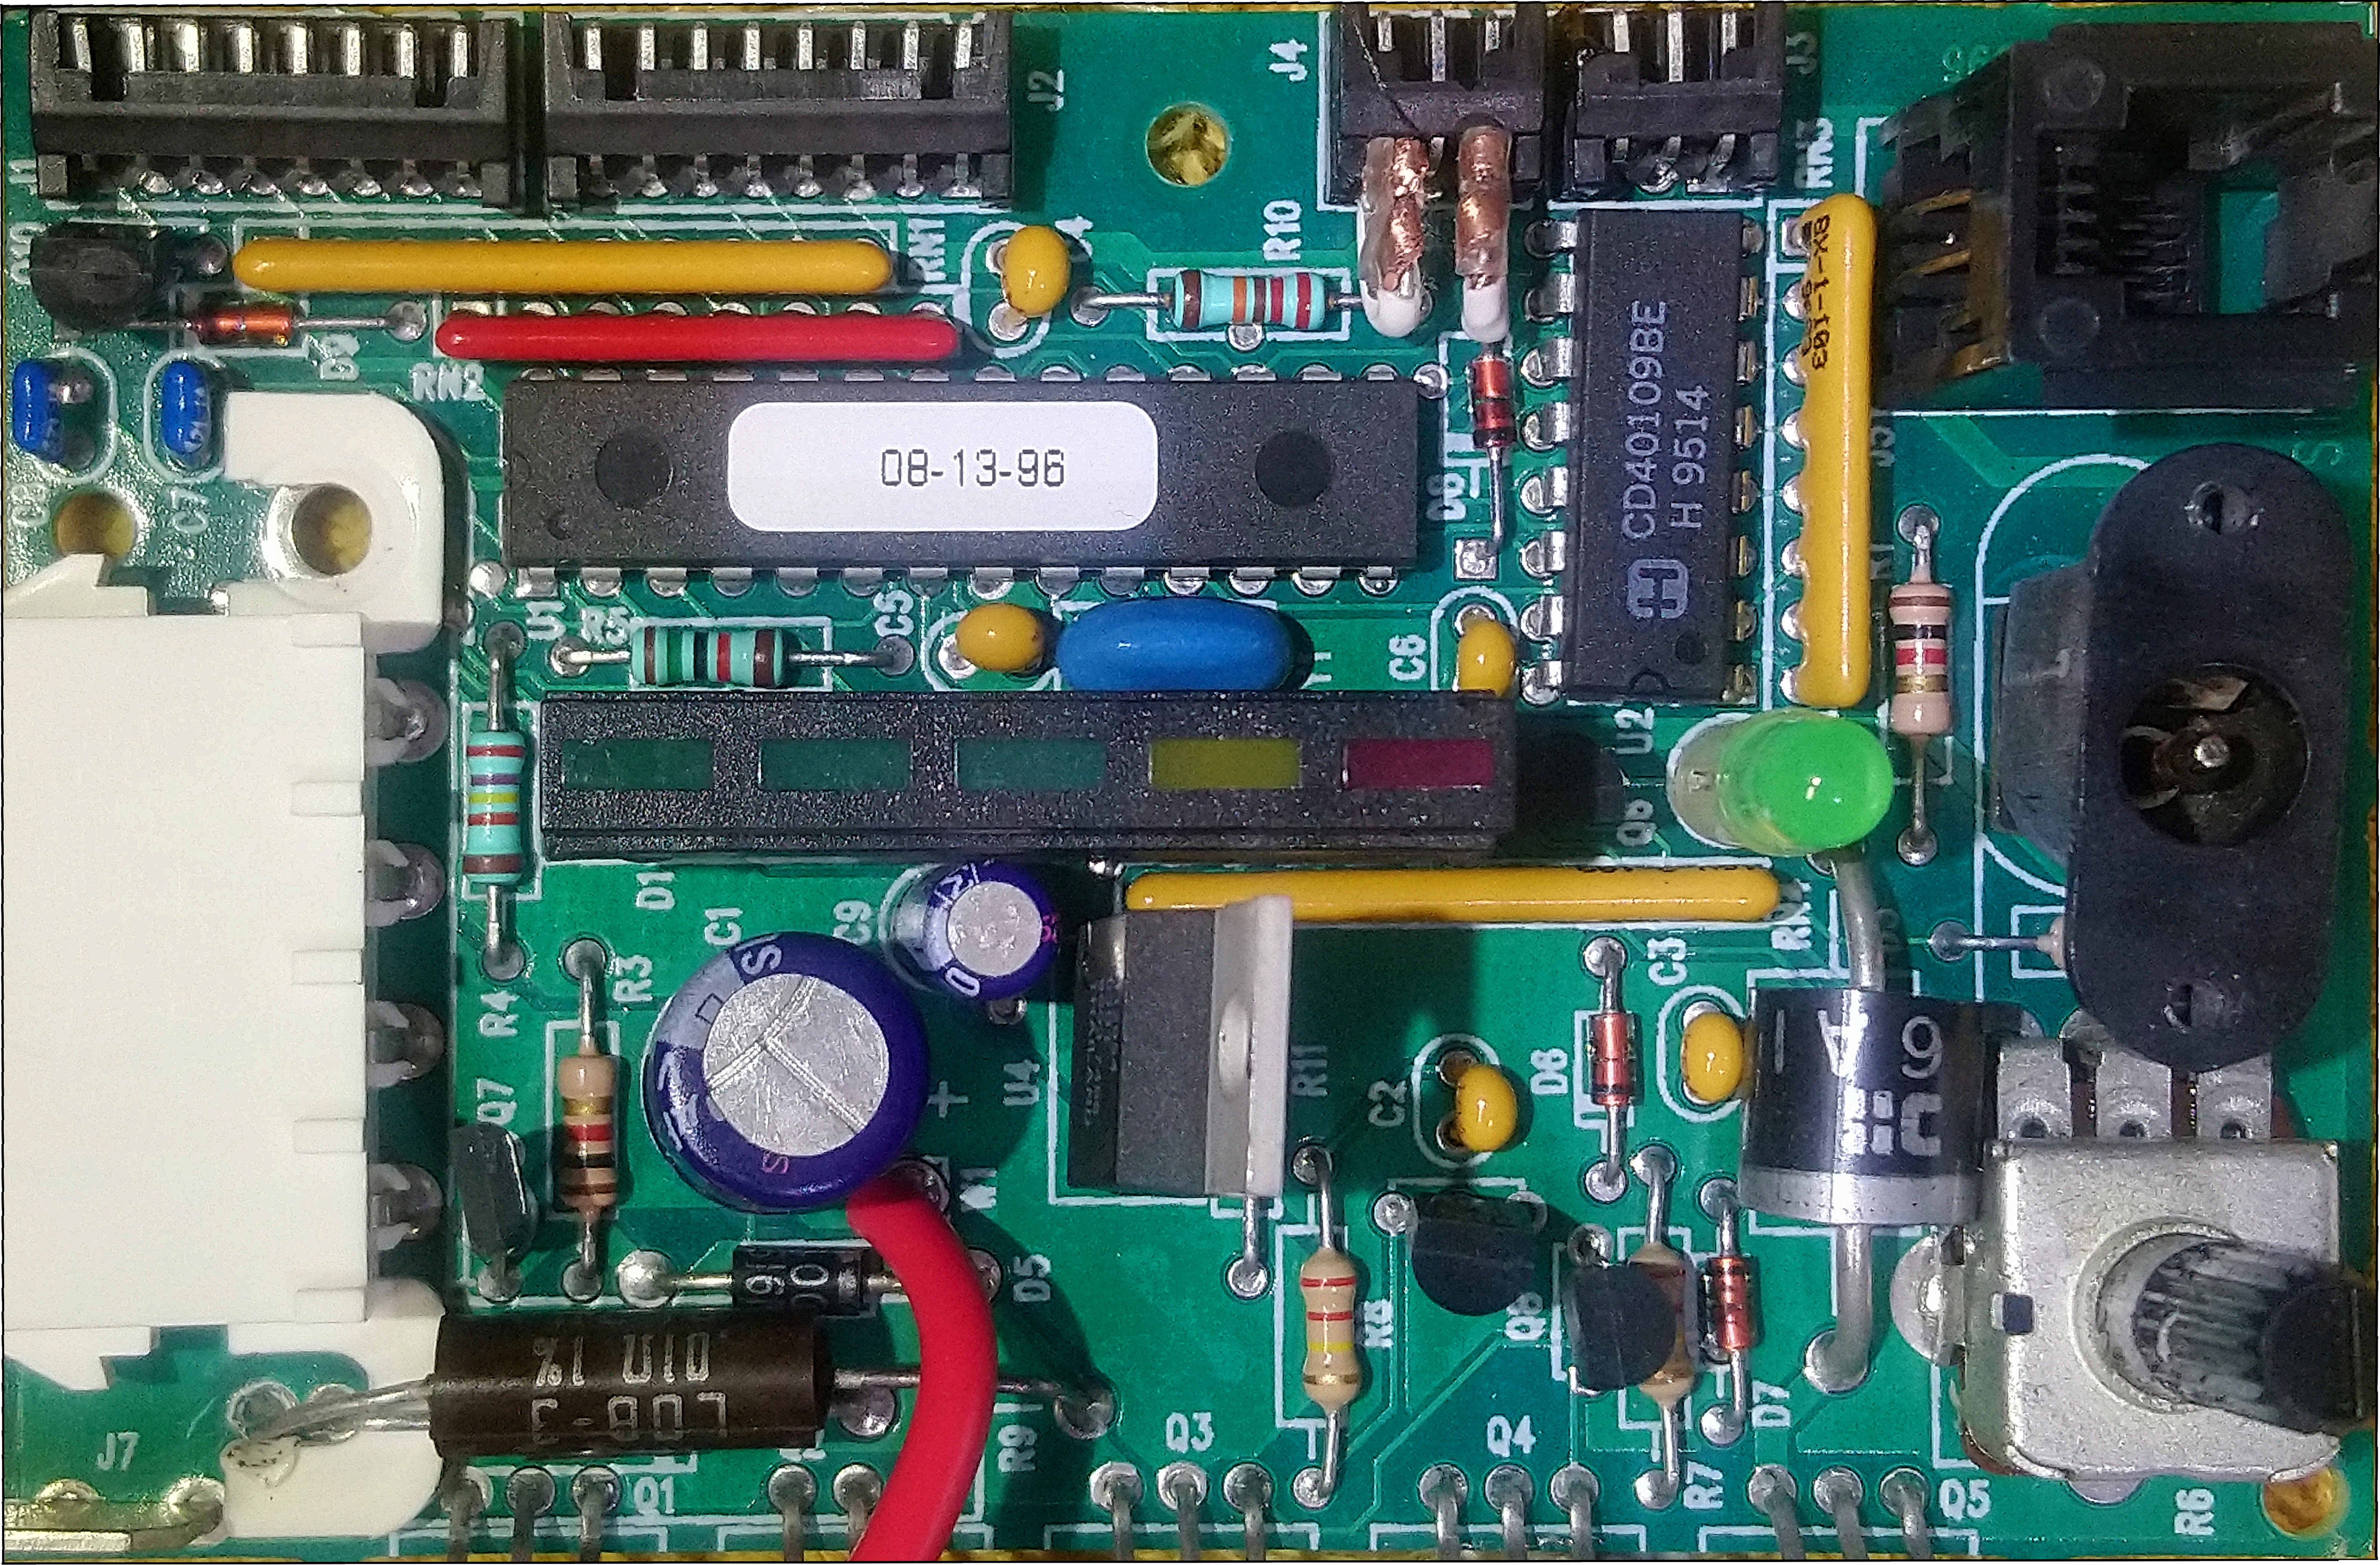 300dpi photo of PCB component side.